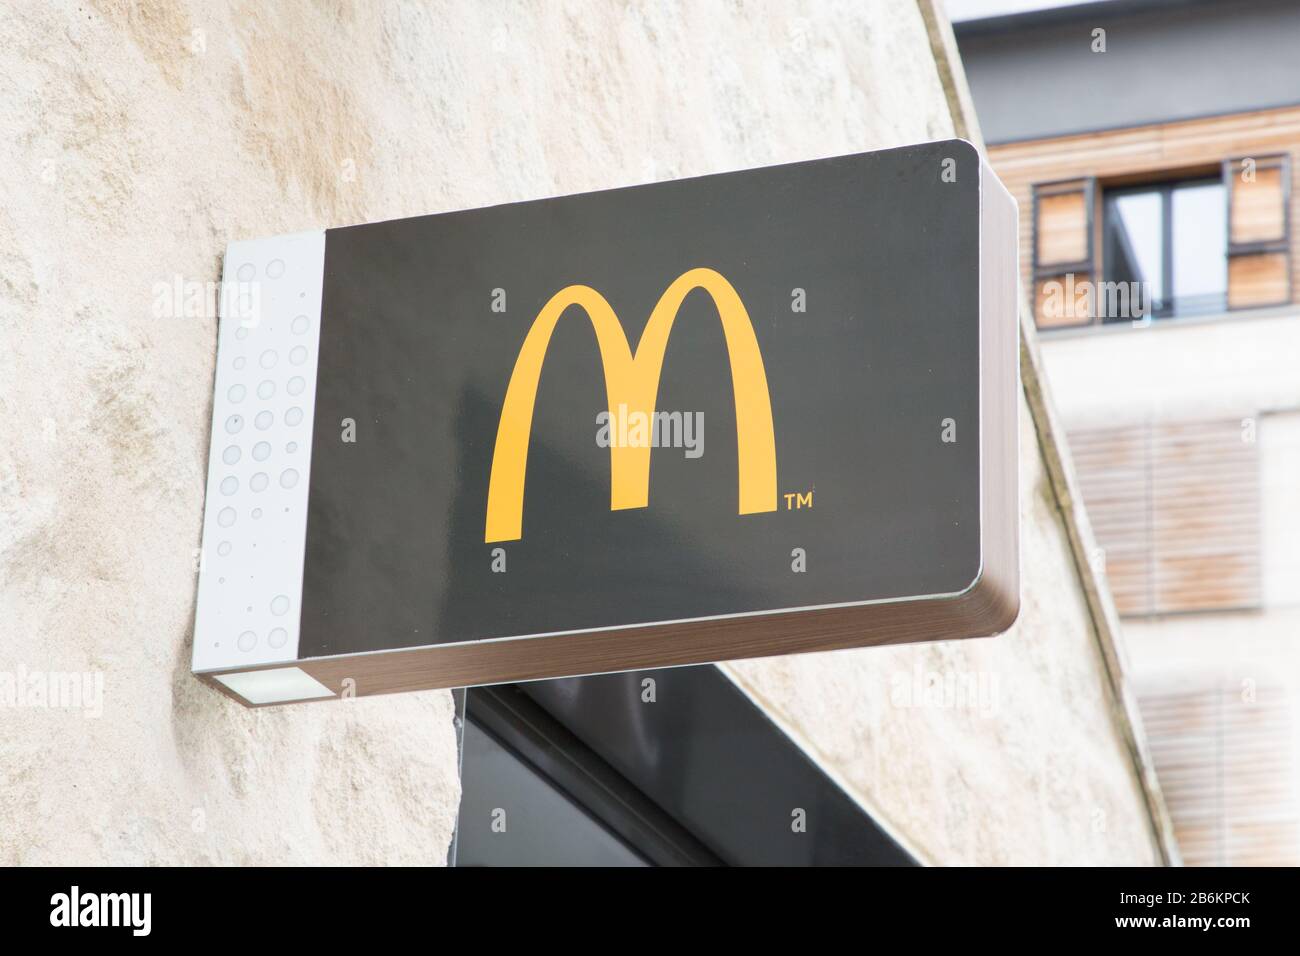 Bordeaux, Aquitaine / France - 06 10 2018 : teaches commercial sign in the street for the brand MC restaurant Mac Donald Stock Photo